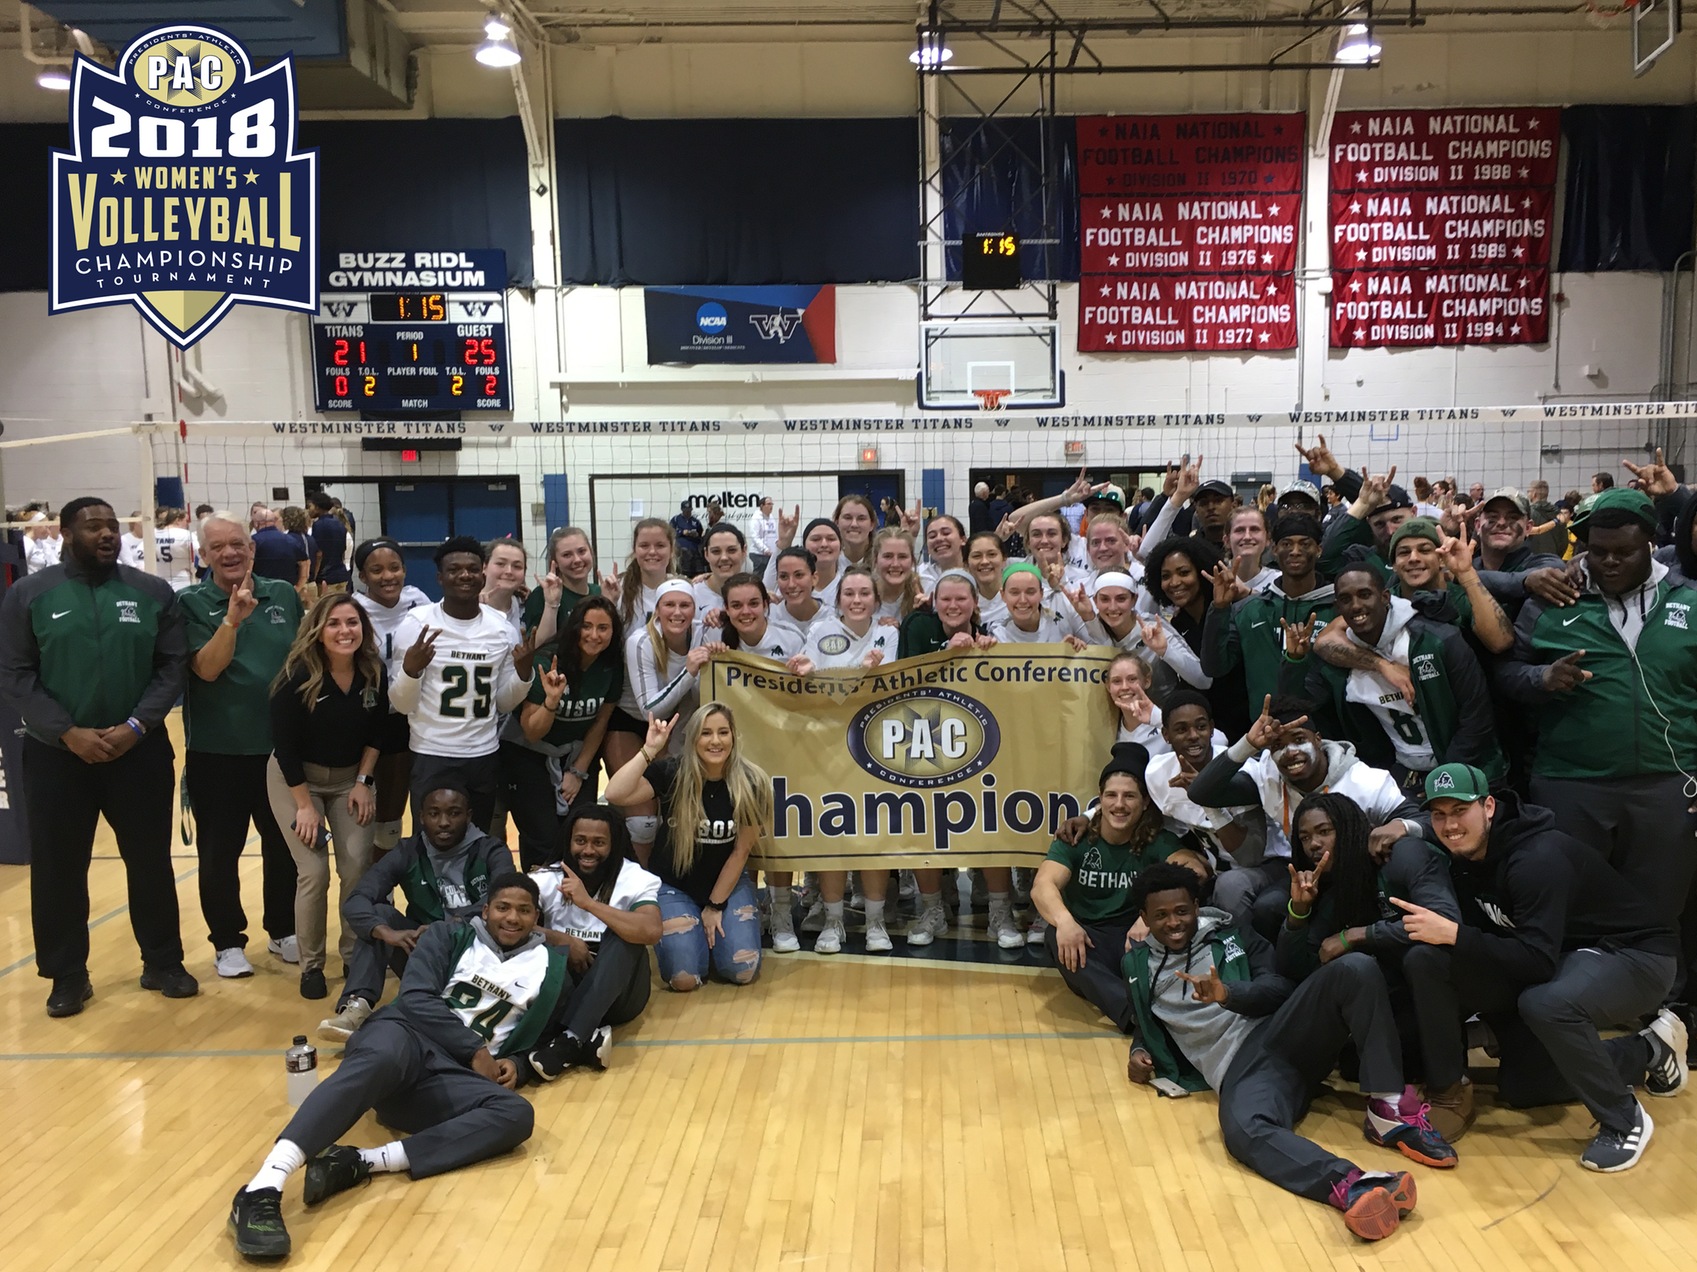 Bethany Clinches PAC Championship Title With Sweep Over Westminster